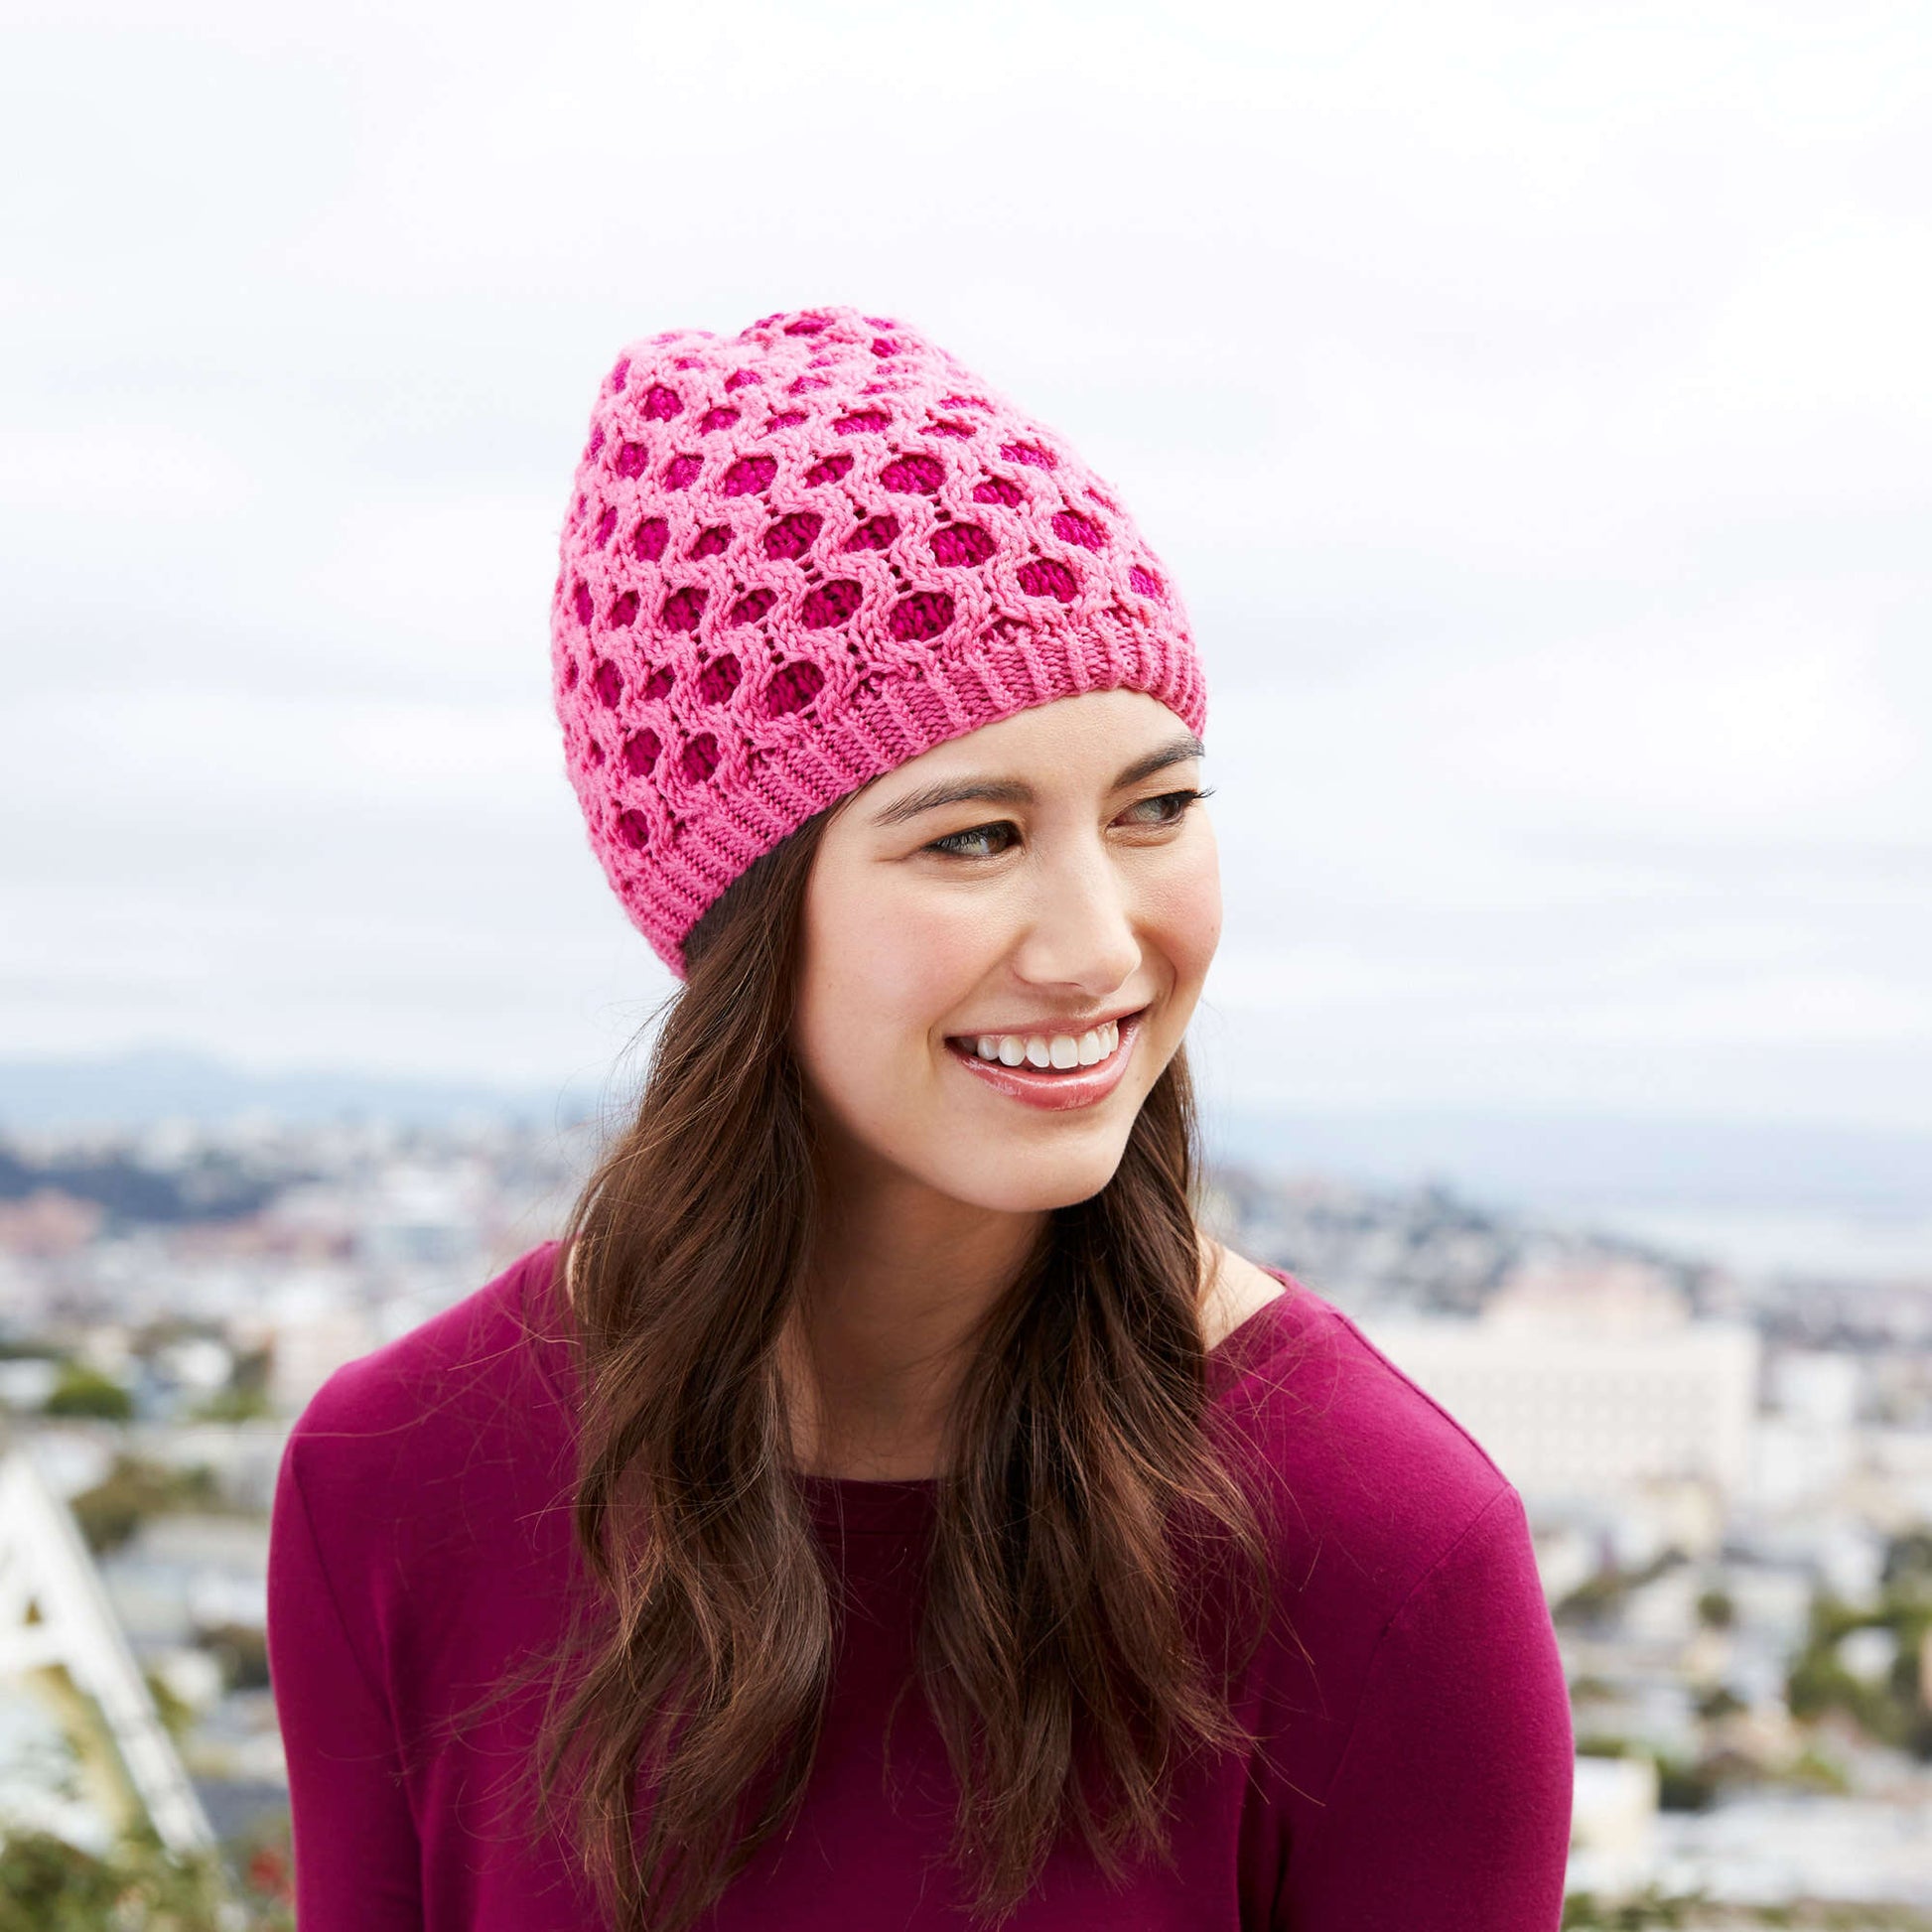 Free Red Heart Knit Capriciously Chic Hat Pattern